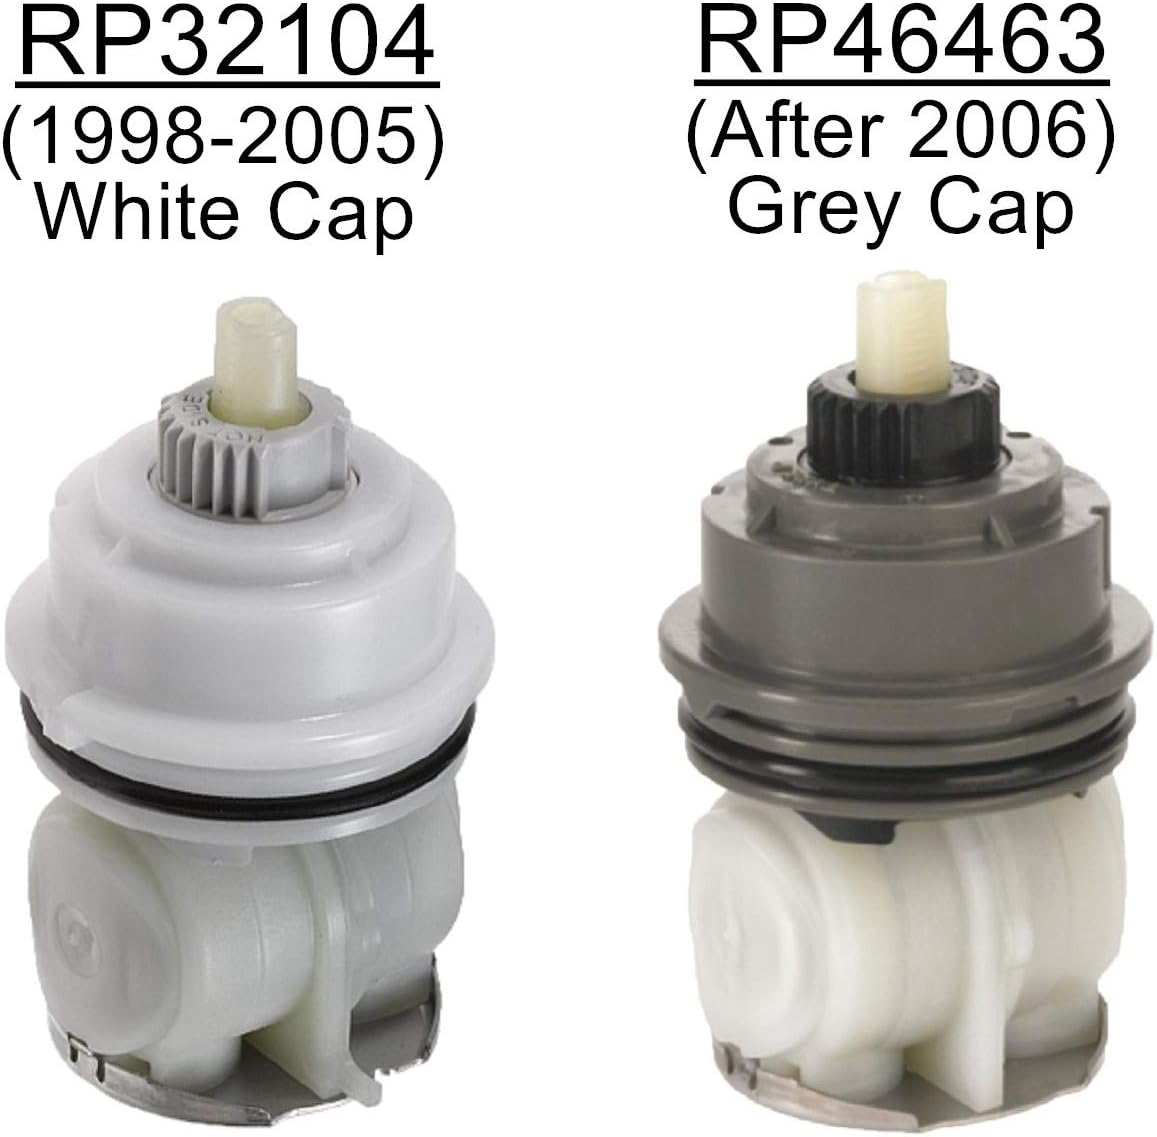 iyax RP32104 Cartridge Assembly Replacement For Delta Monitor 1700 Series (1998-2005) Tub/Shower Faucet Valve